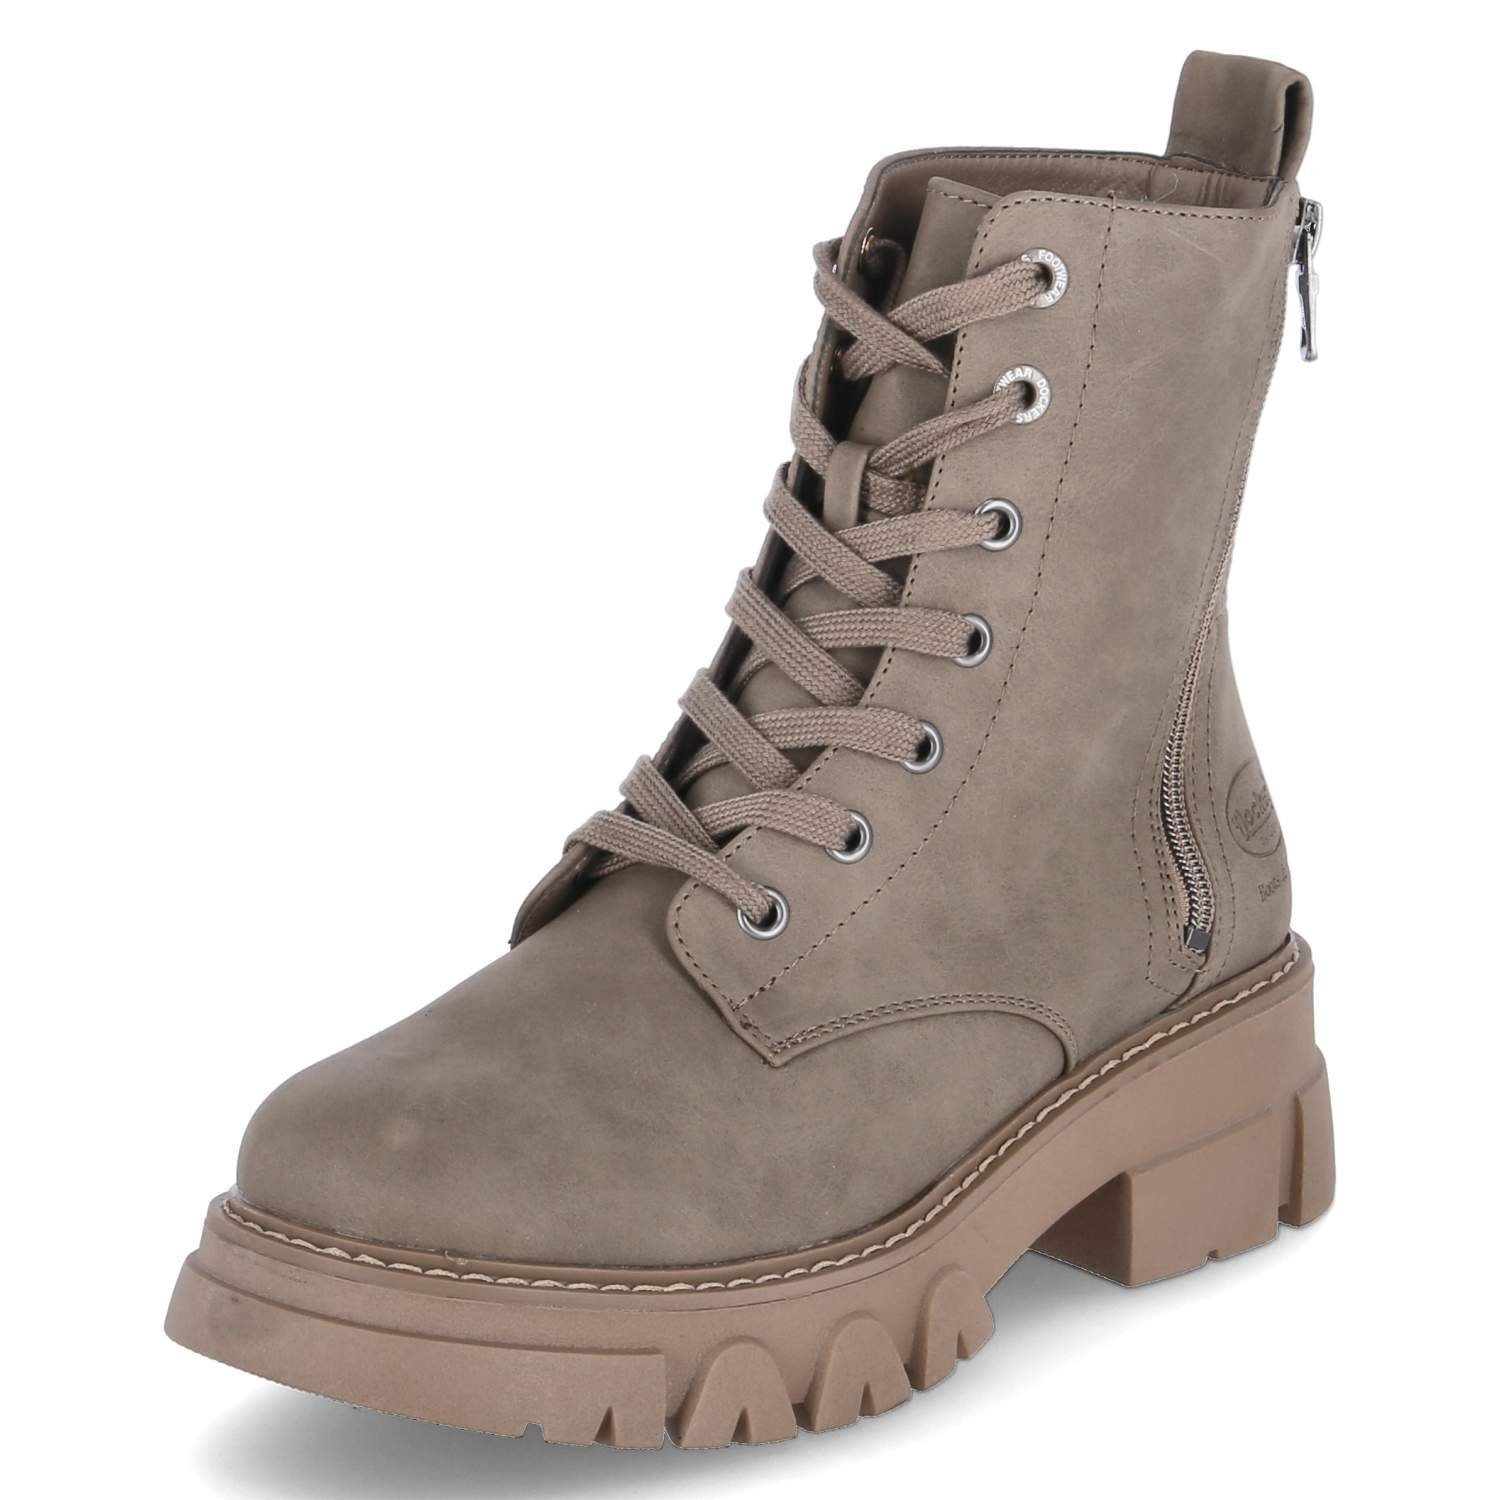 630430 Gerli Boots Schnürstiefel Combat Dockers by taupe